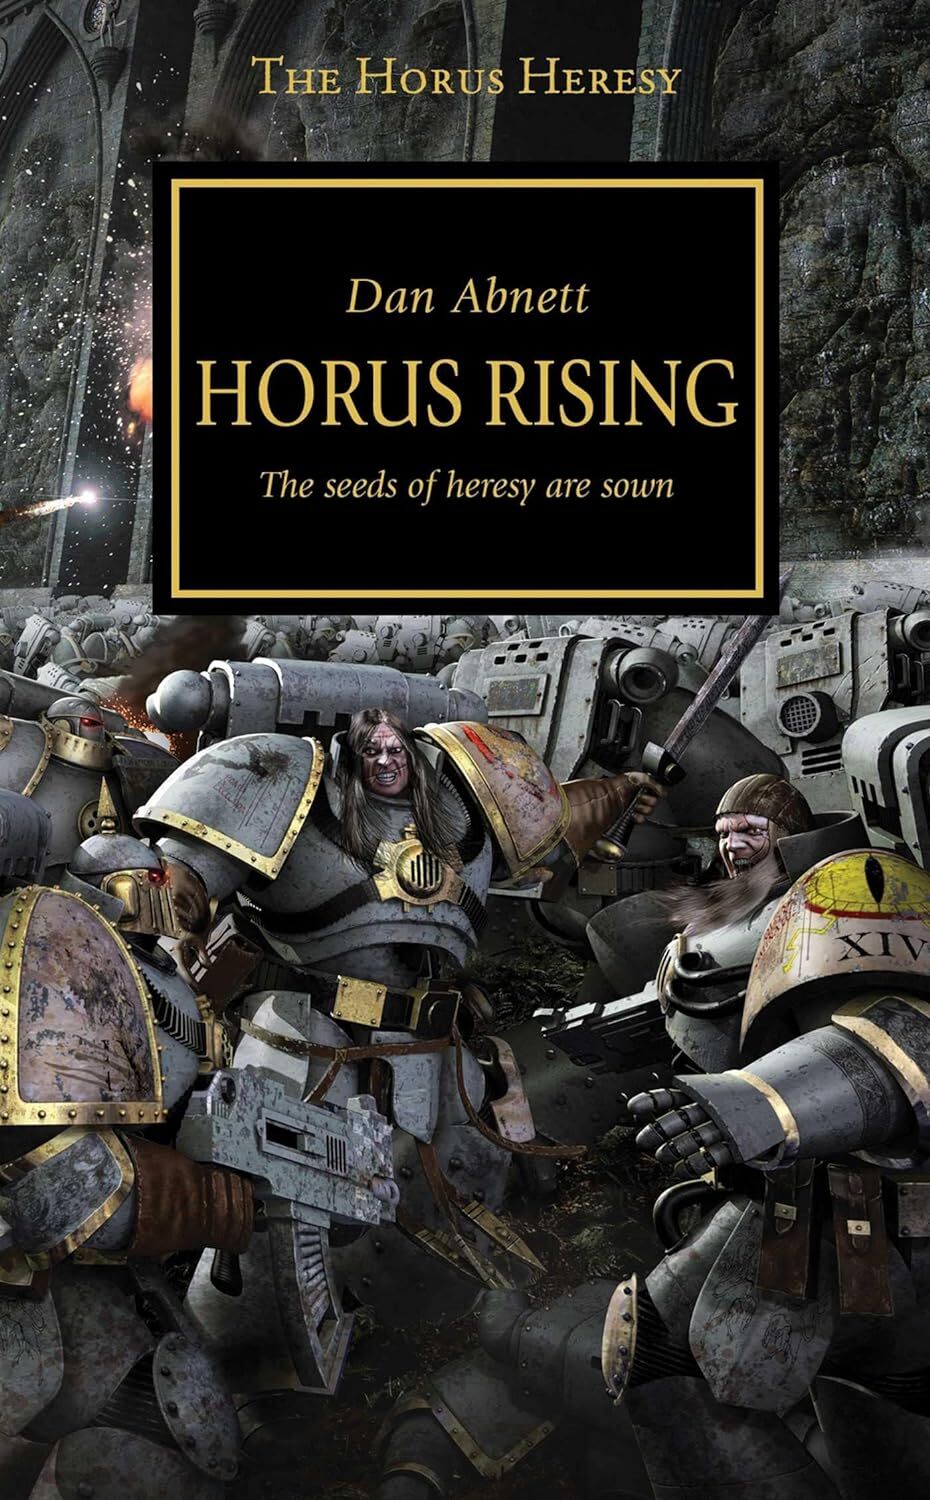 Horus Rising: The seeds of heresy are sown